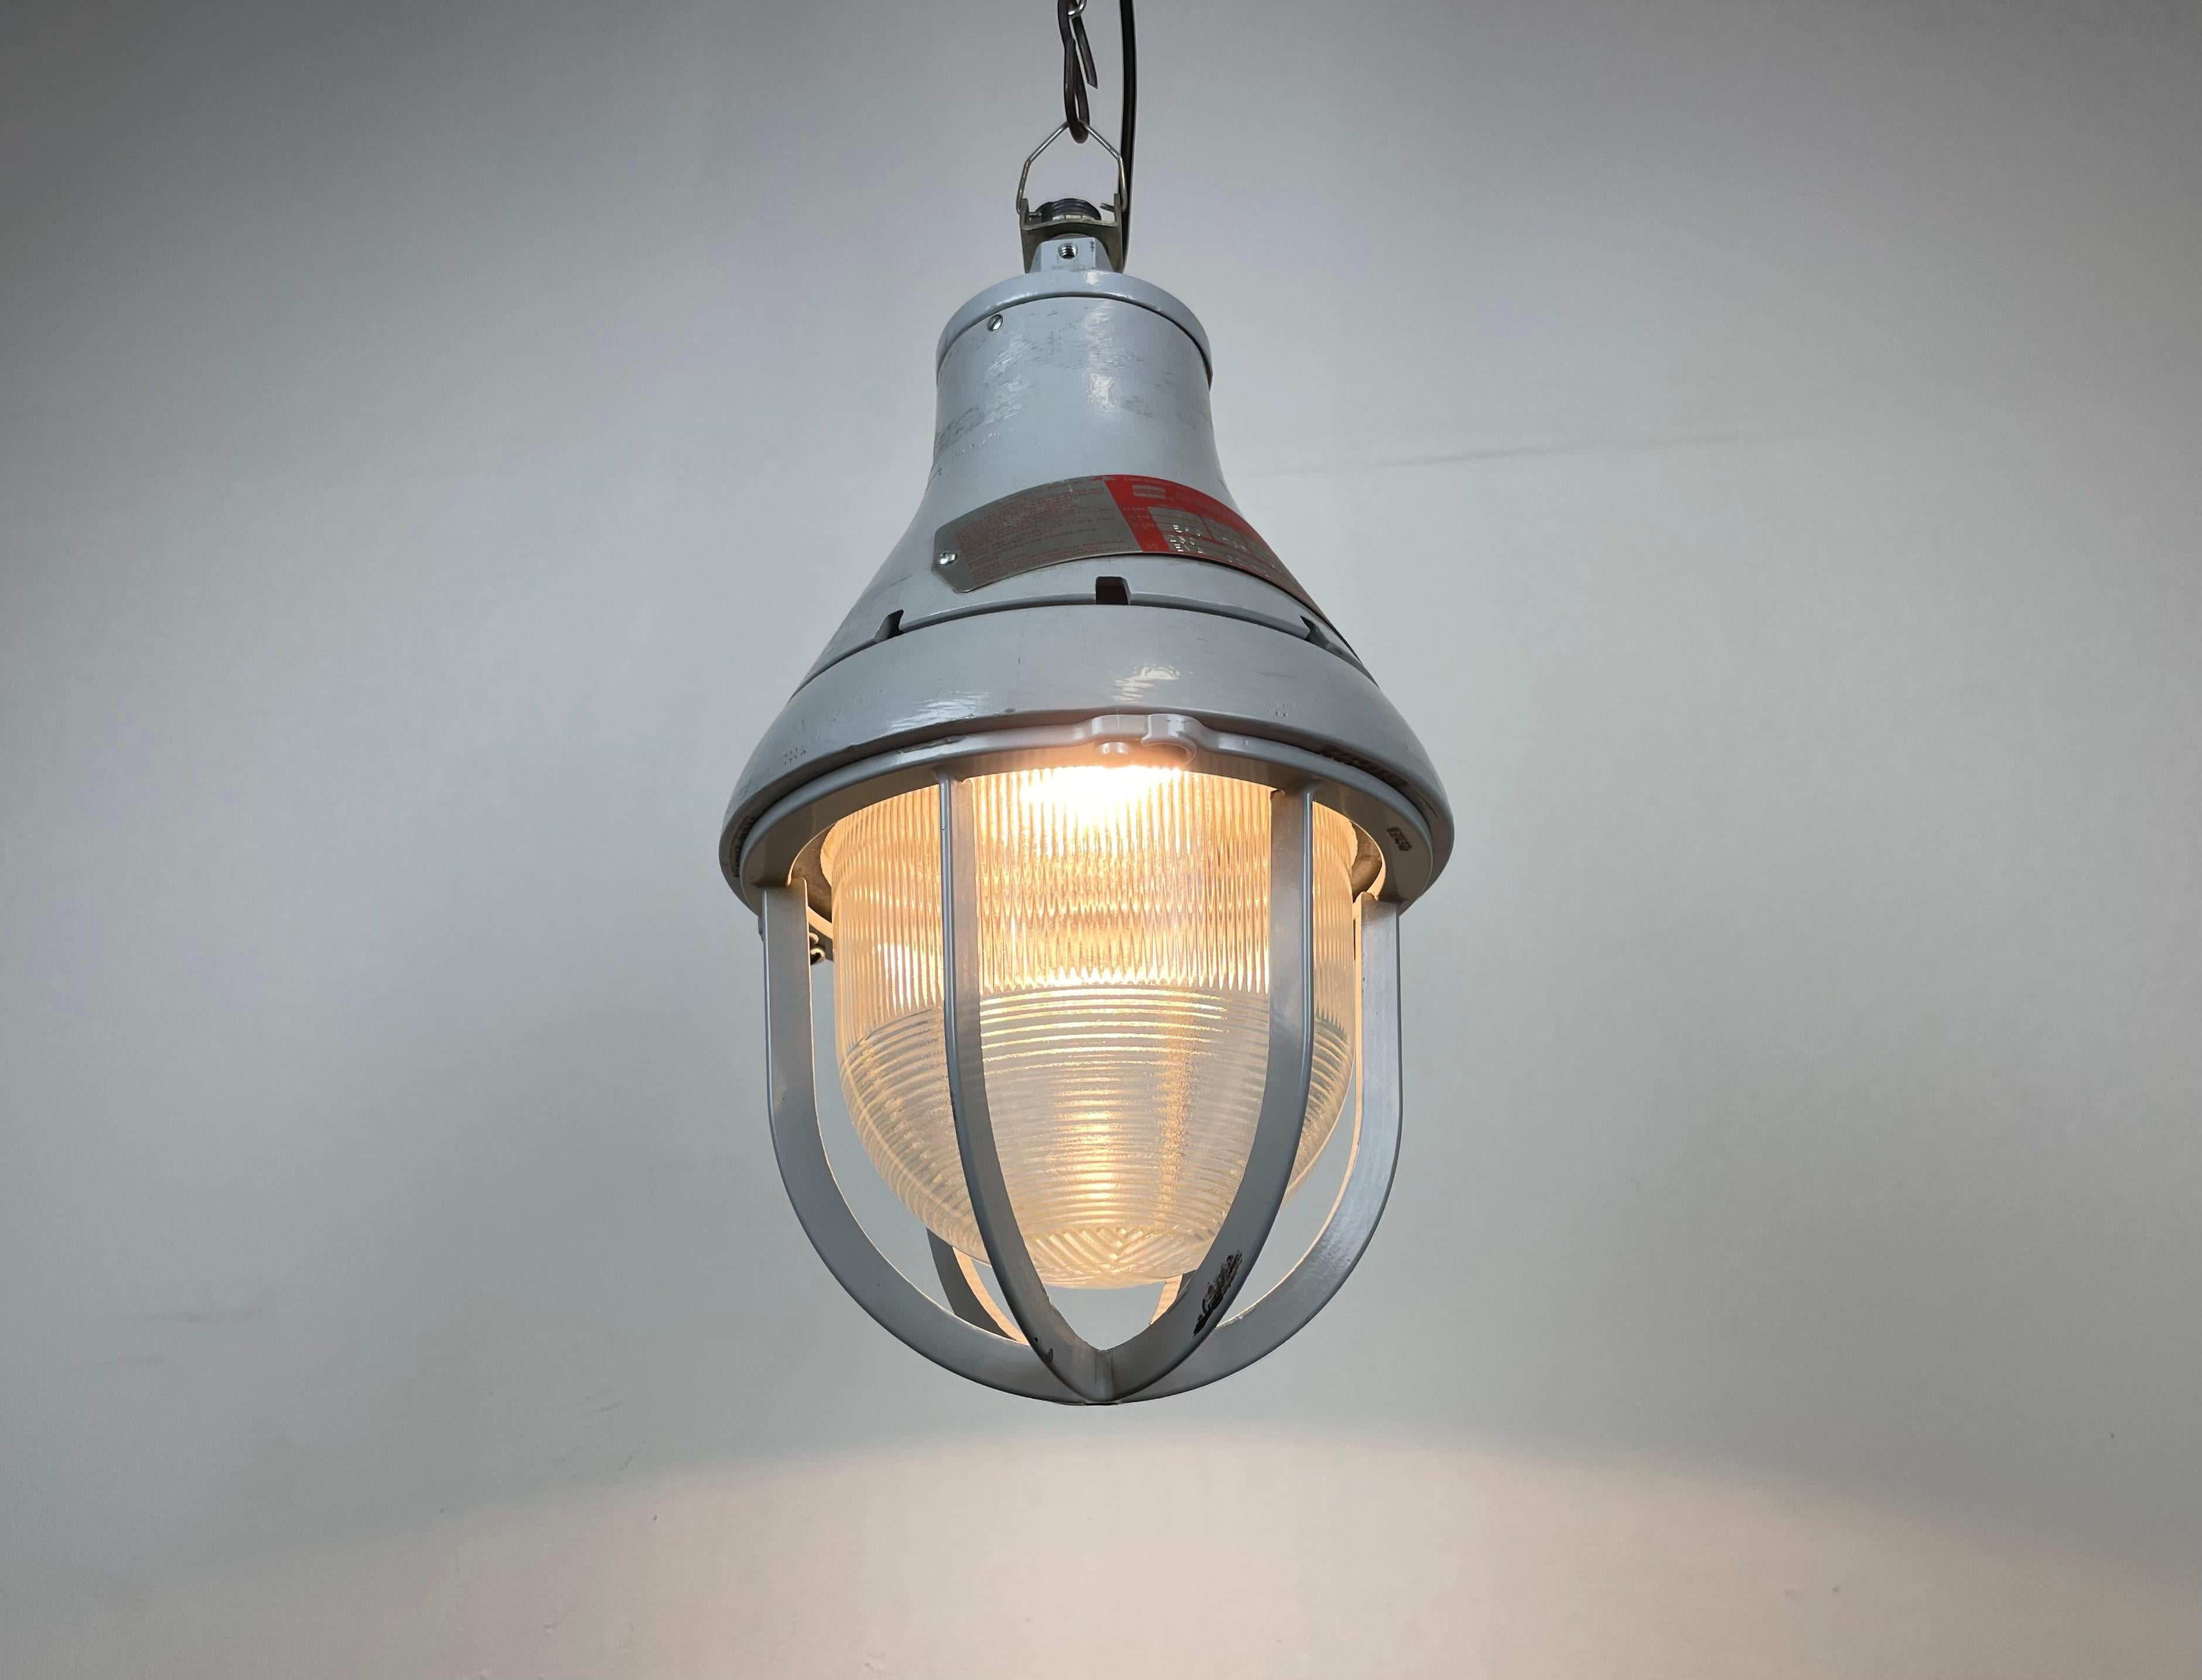 Grey Industrial Explosion Proof Light from Crouse-Hinds, 1970s For Sale 2